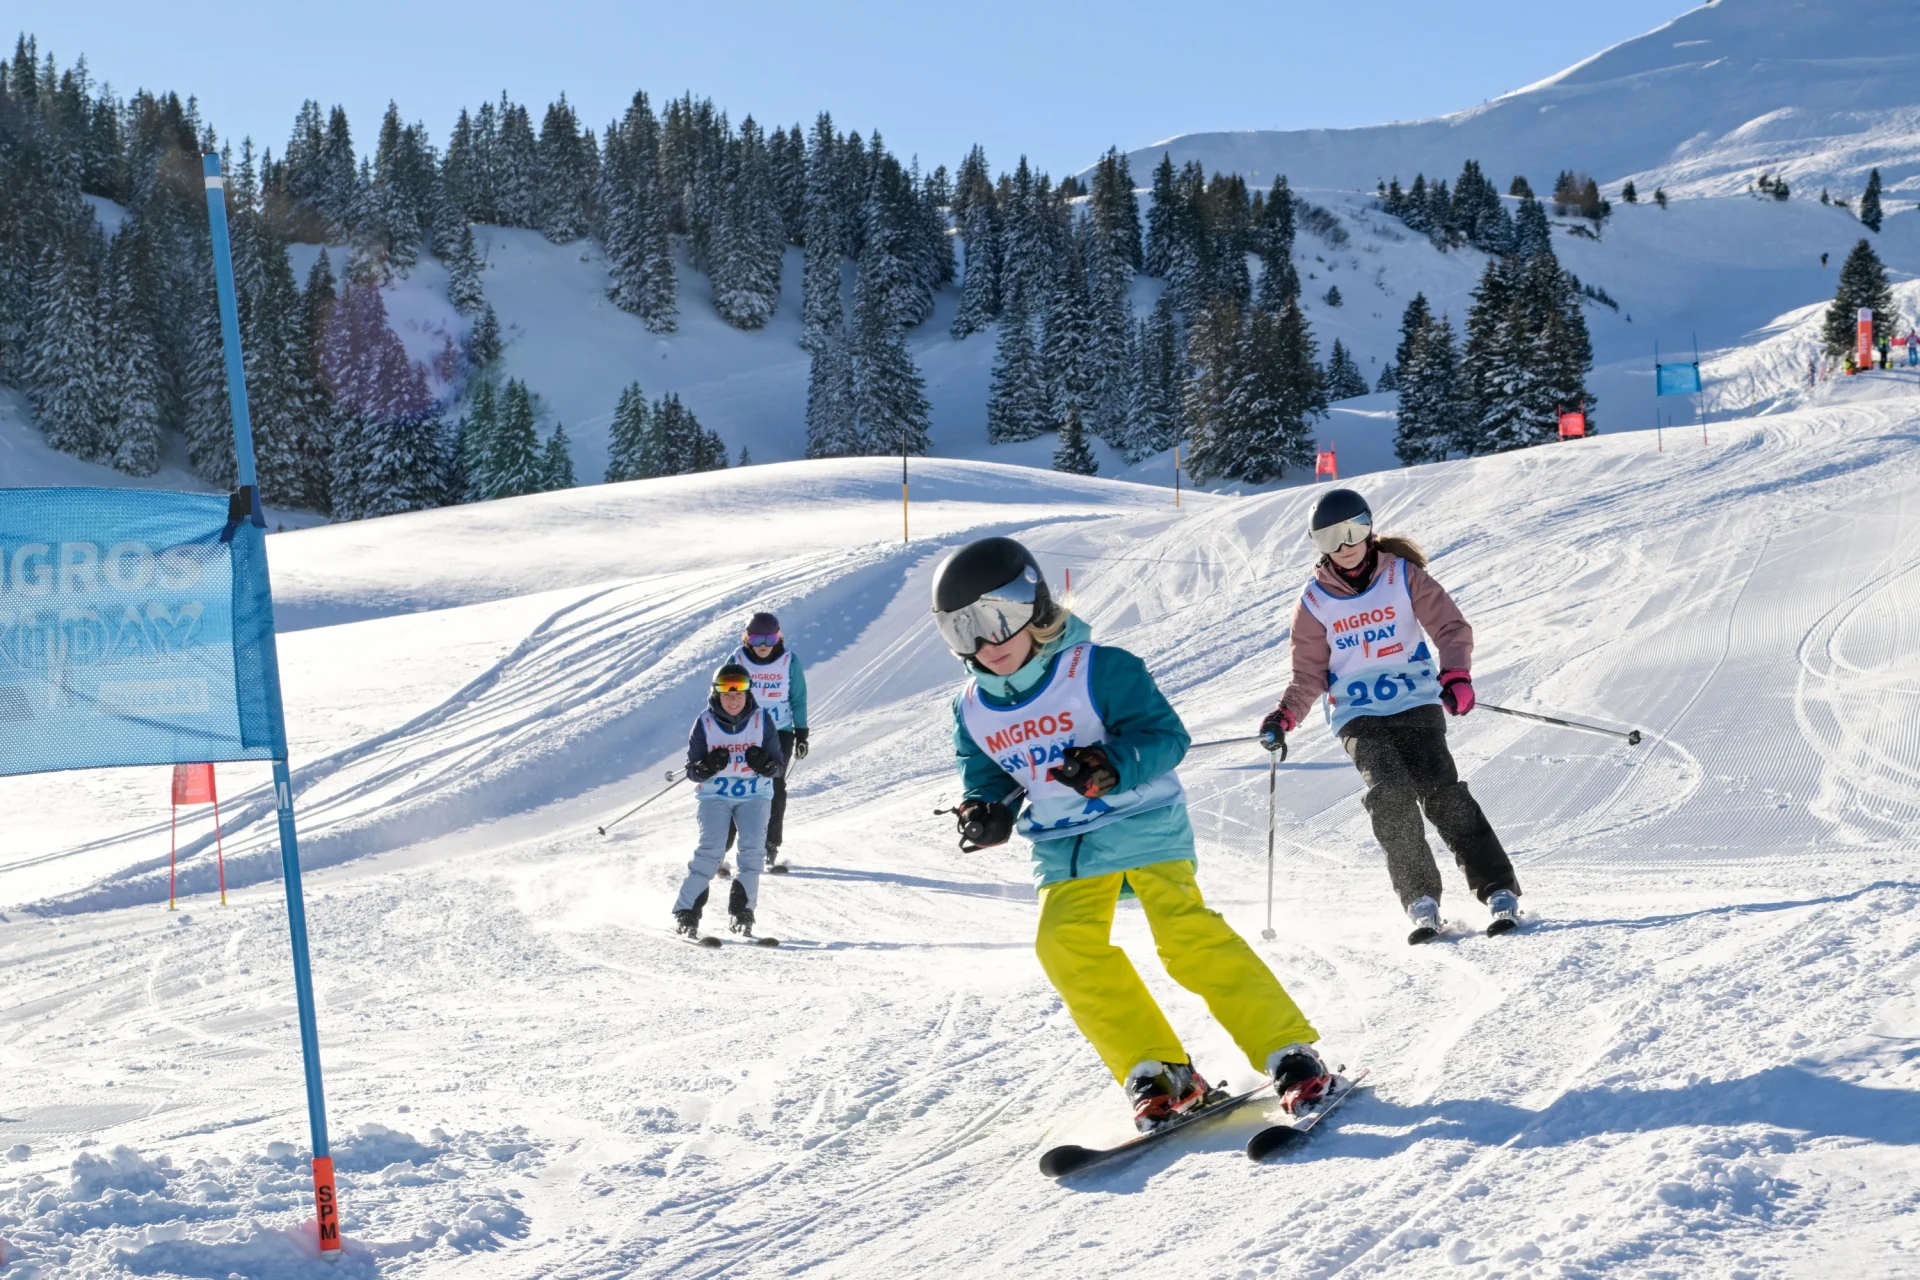 Family skiing down a slope during Migros Ski Day.